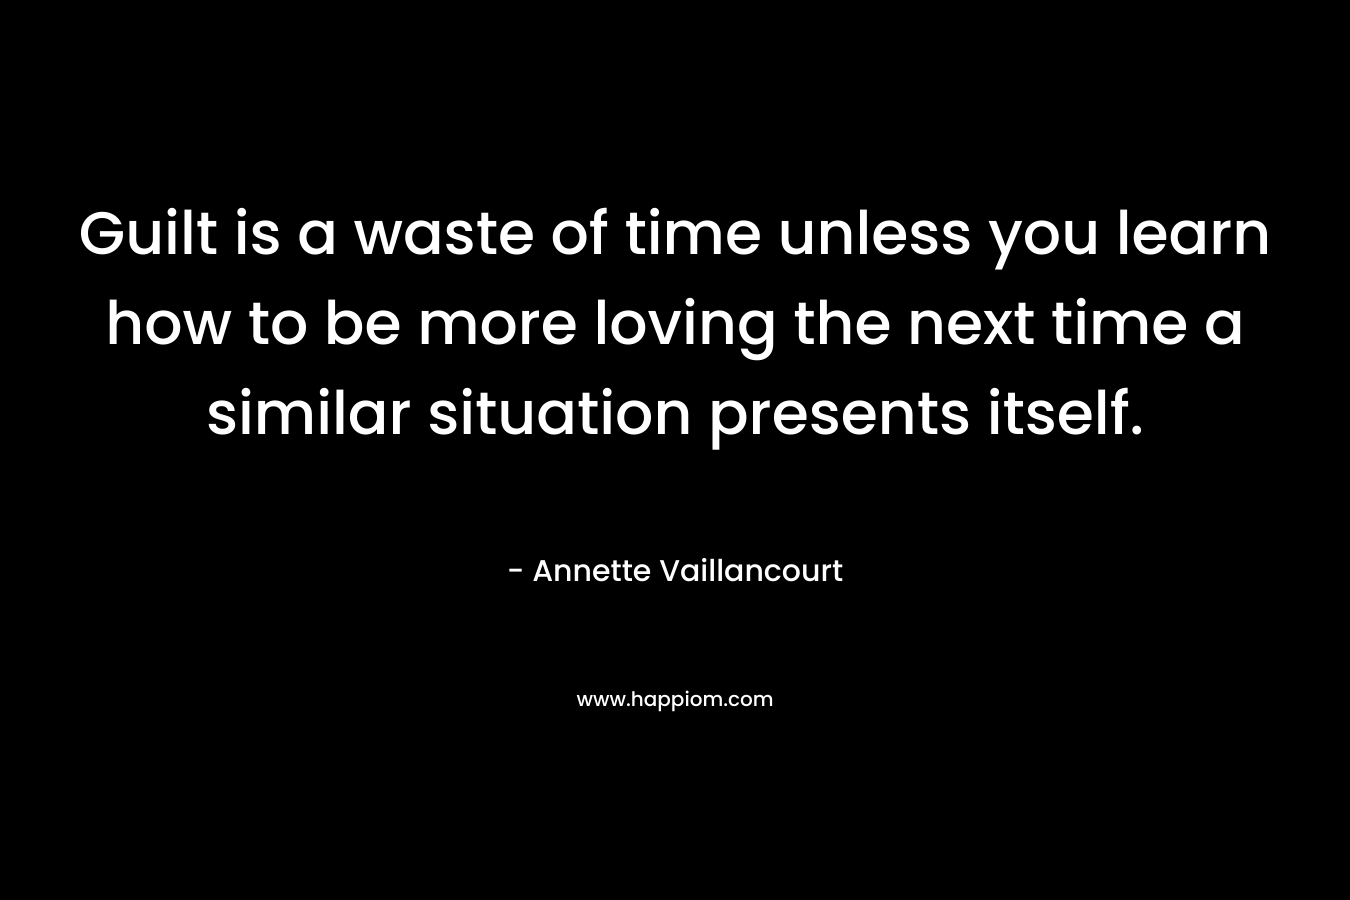 Guilt is a waste of time unless you learn how to be more loving the next time a similar situation presents itself. – Annette Vaillancourt